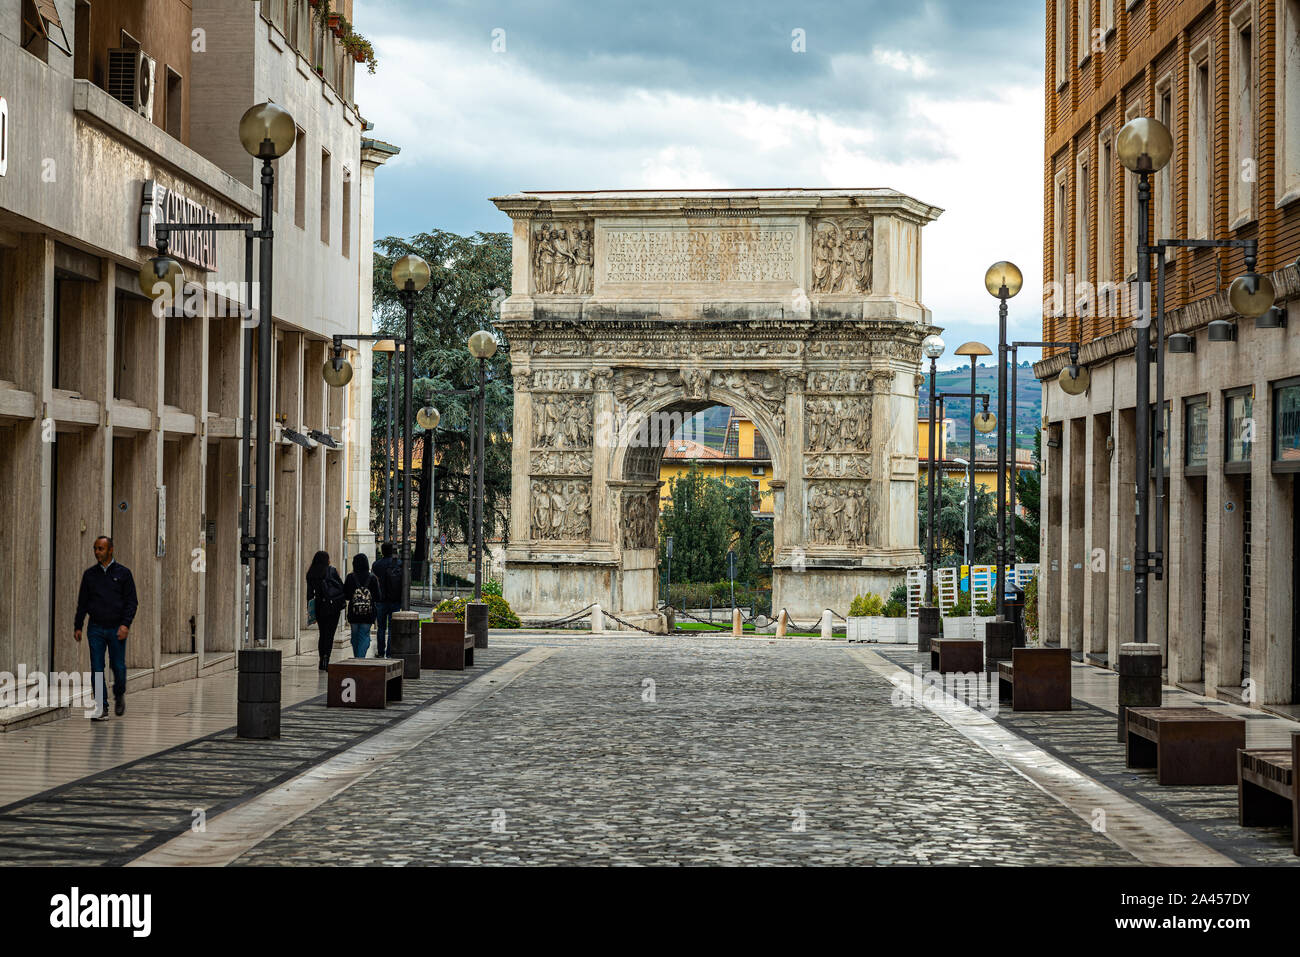 Ancient Roman Arch of Trajan, triumphal arches best preserved.. Benevento, Italy Stock Photo